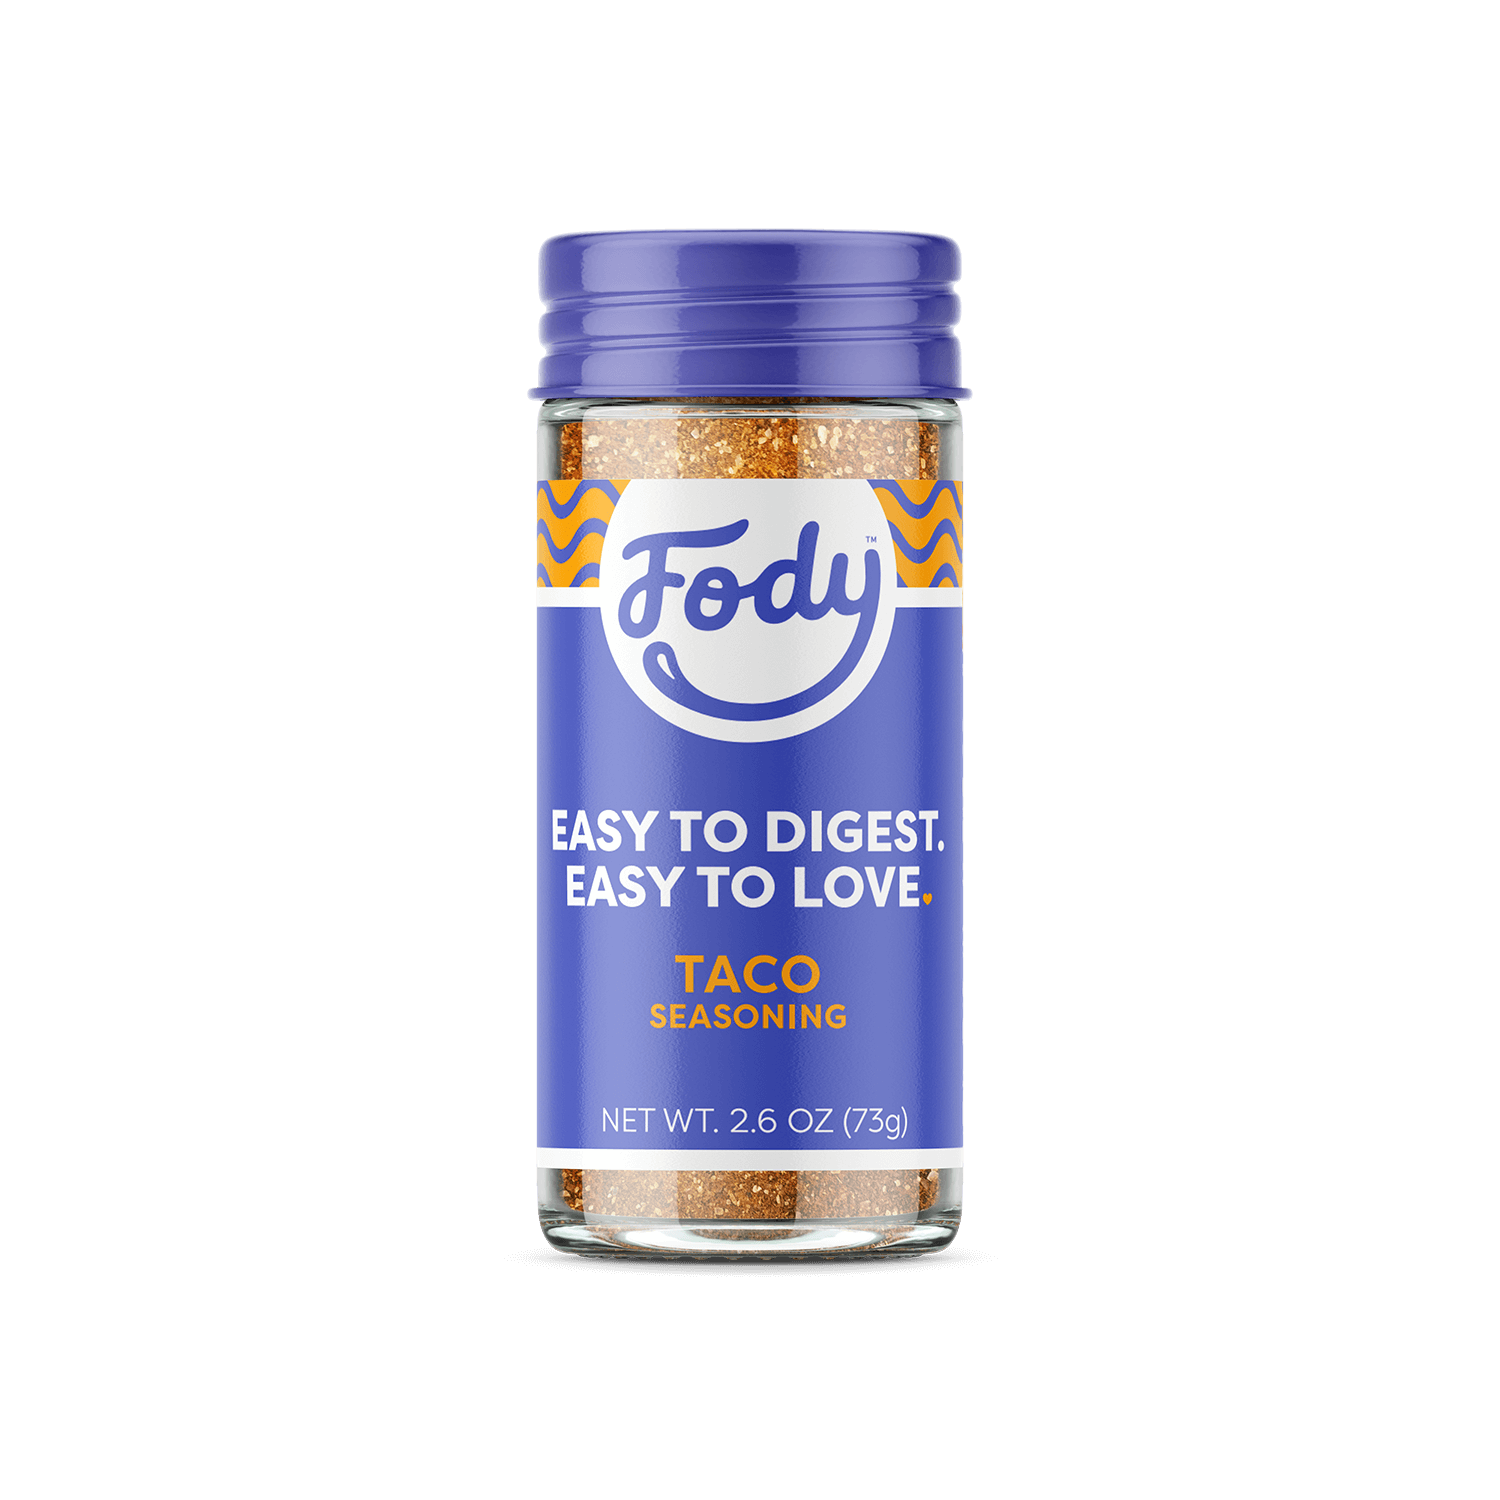 https://cdn.shopify.com/s/files/1/1657/0407/products/fody-product-usa-seasoning-taco.png?v=1666659190&width=2000